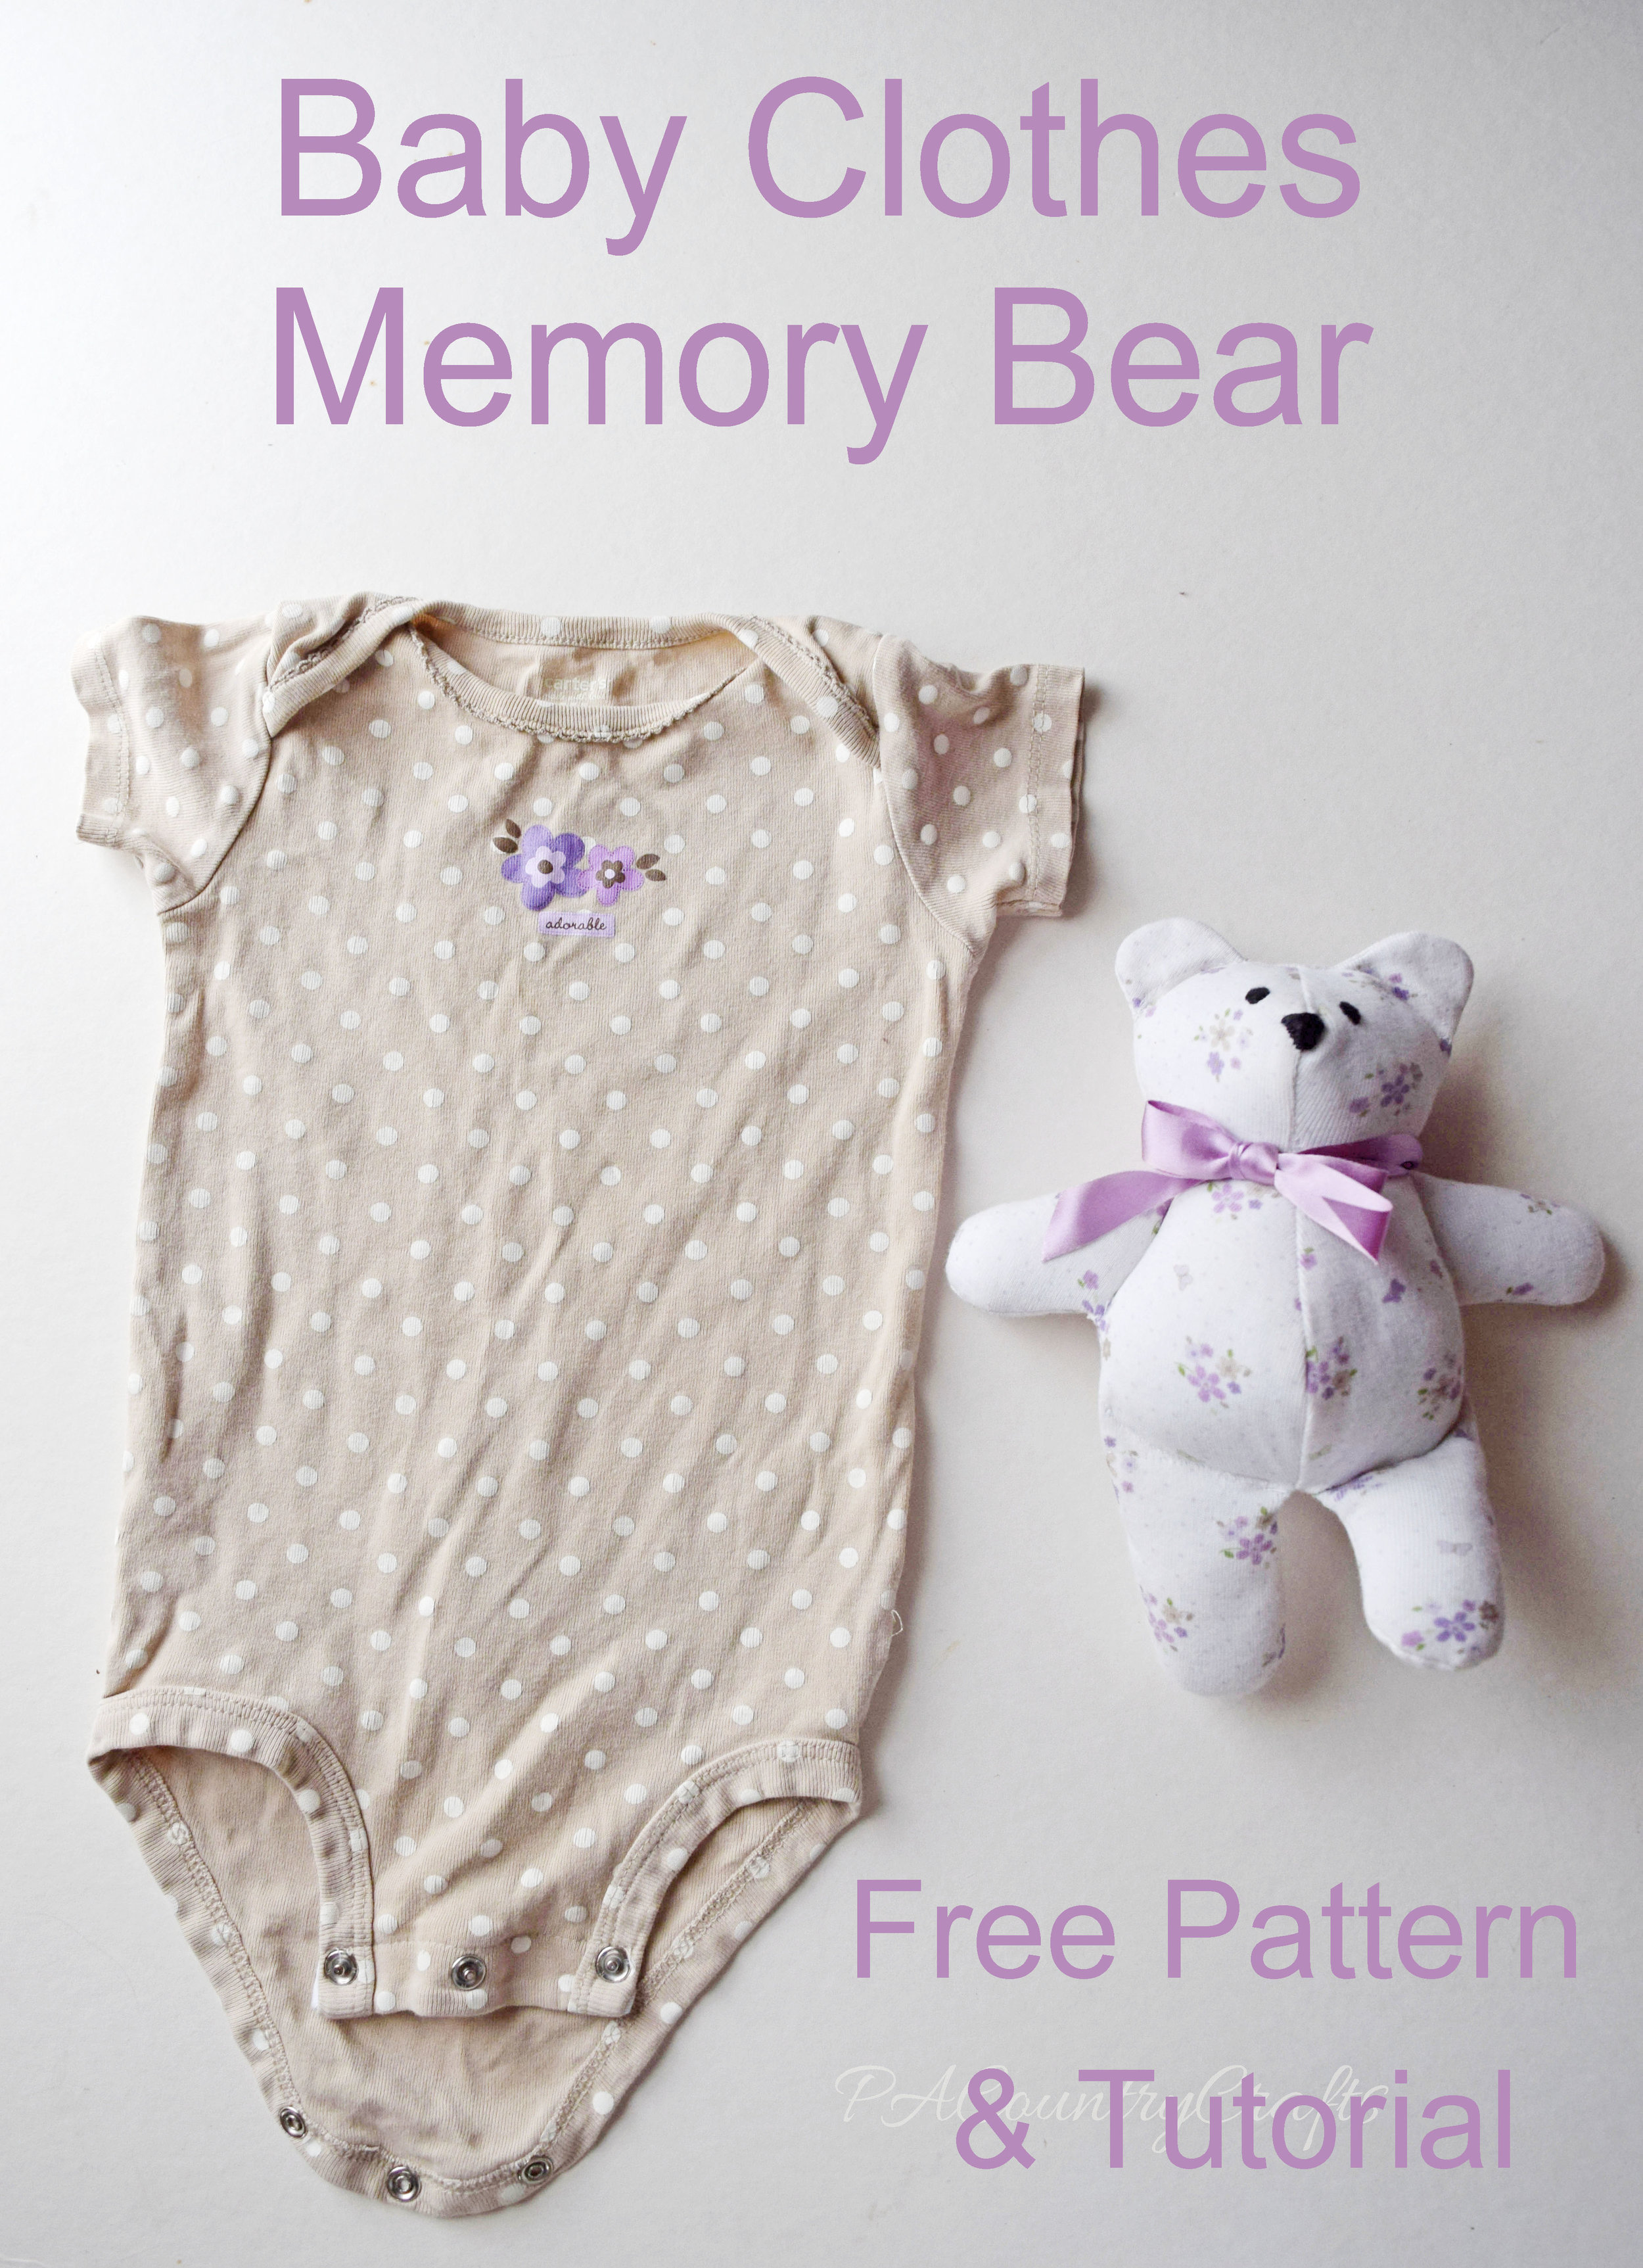 Turn old baby clothes into a memory bear.